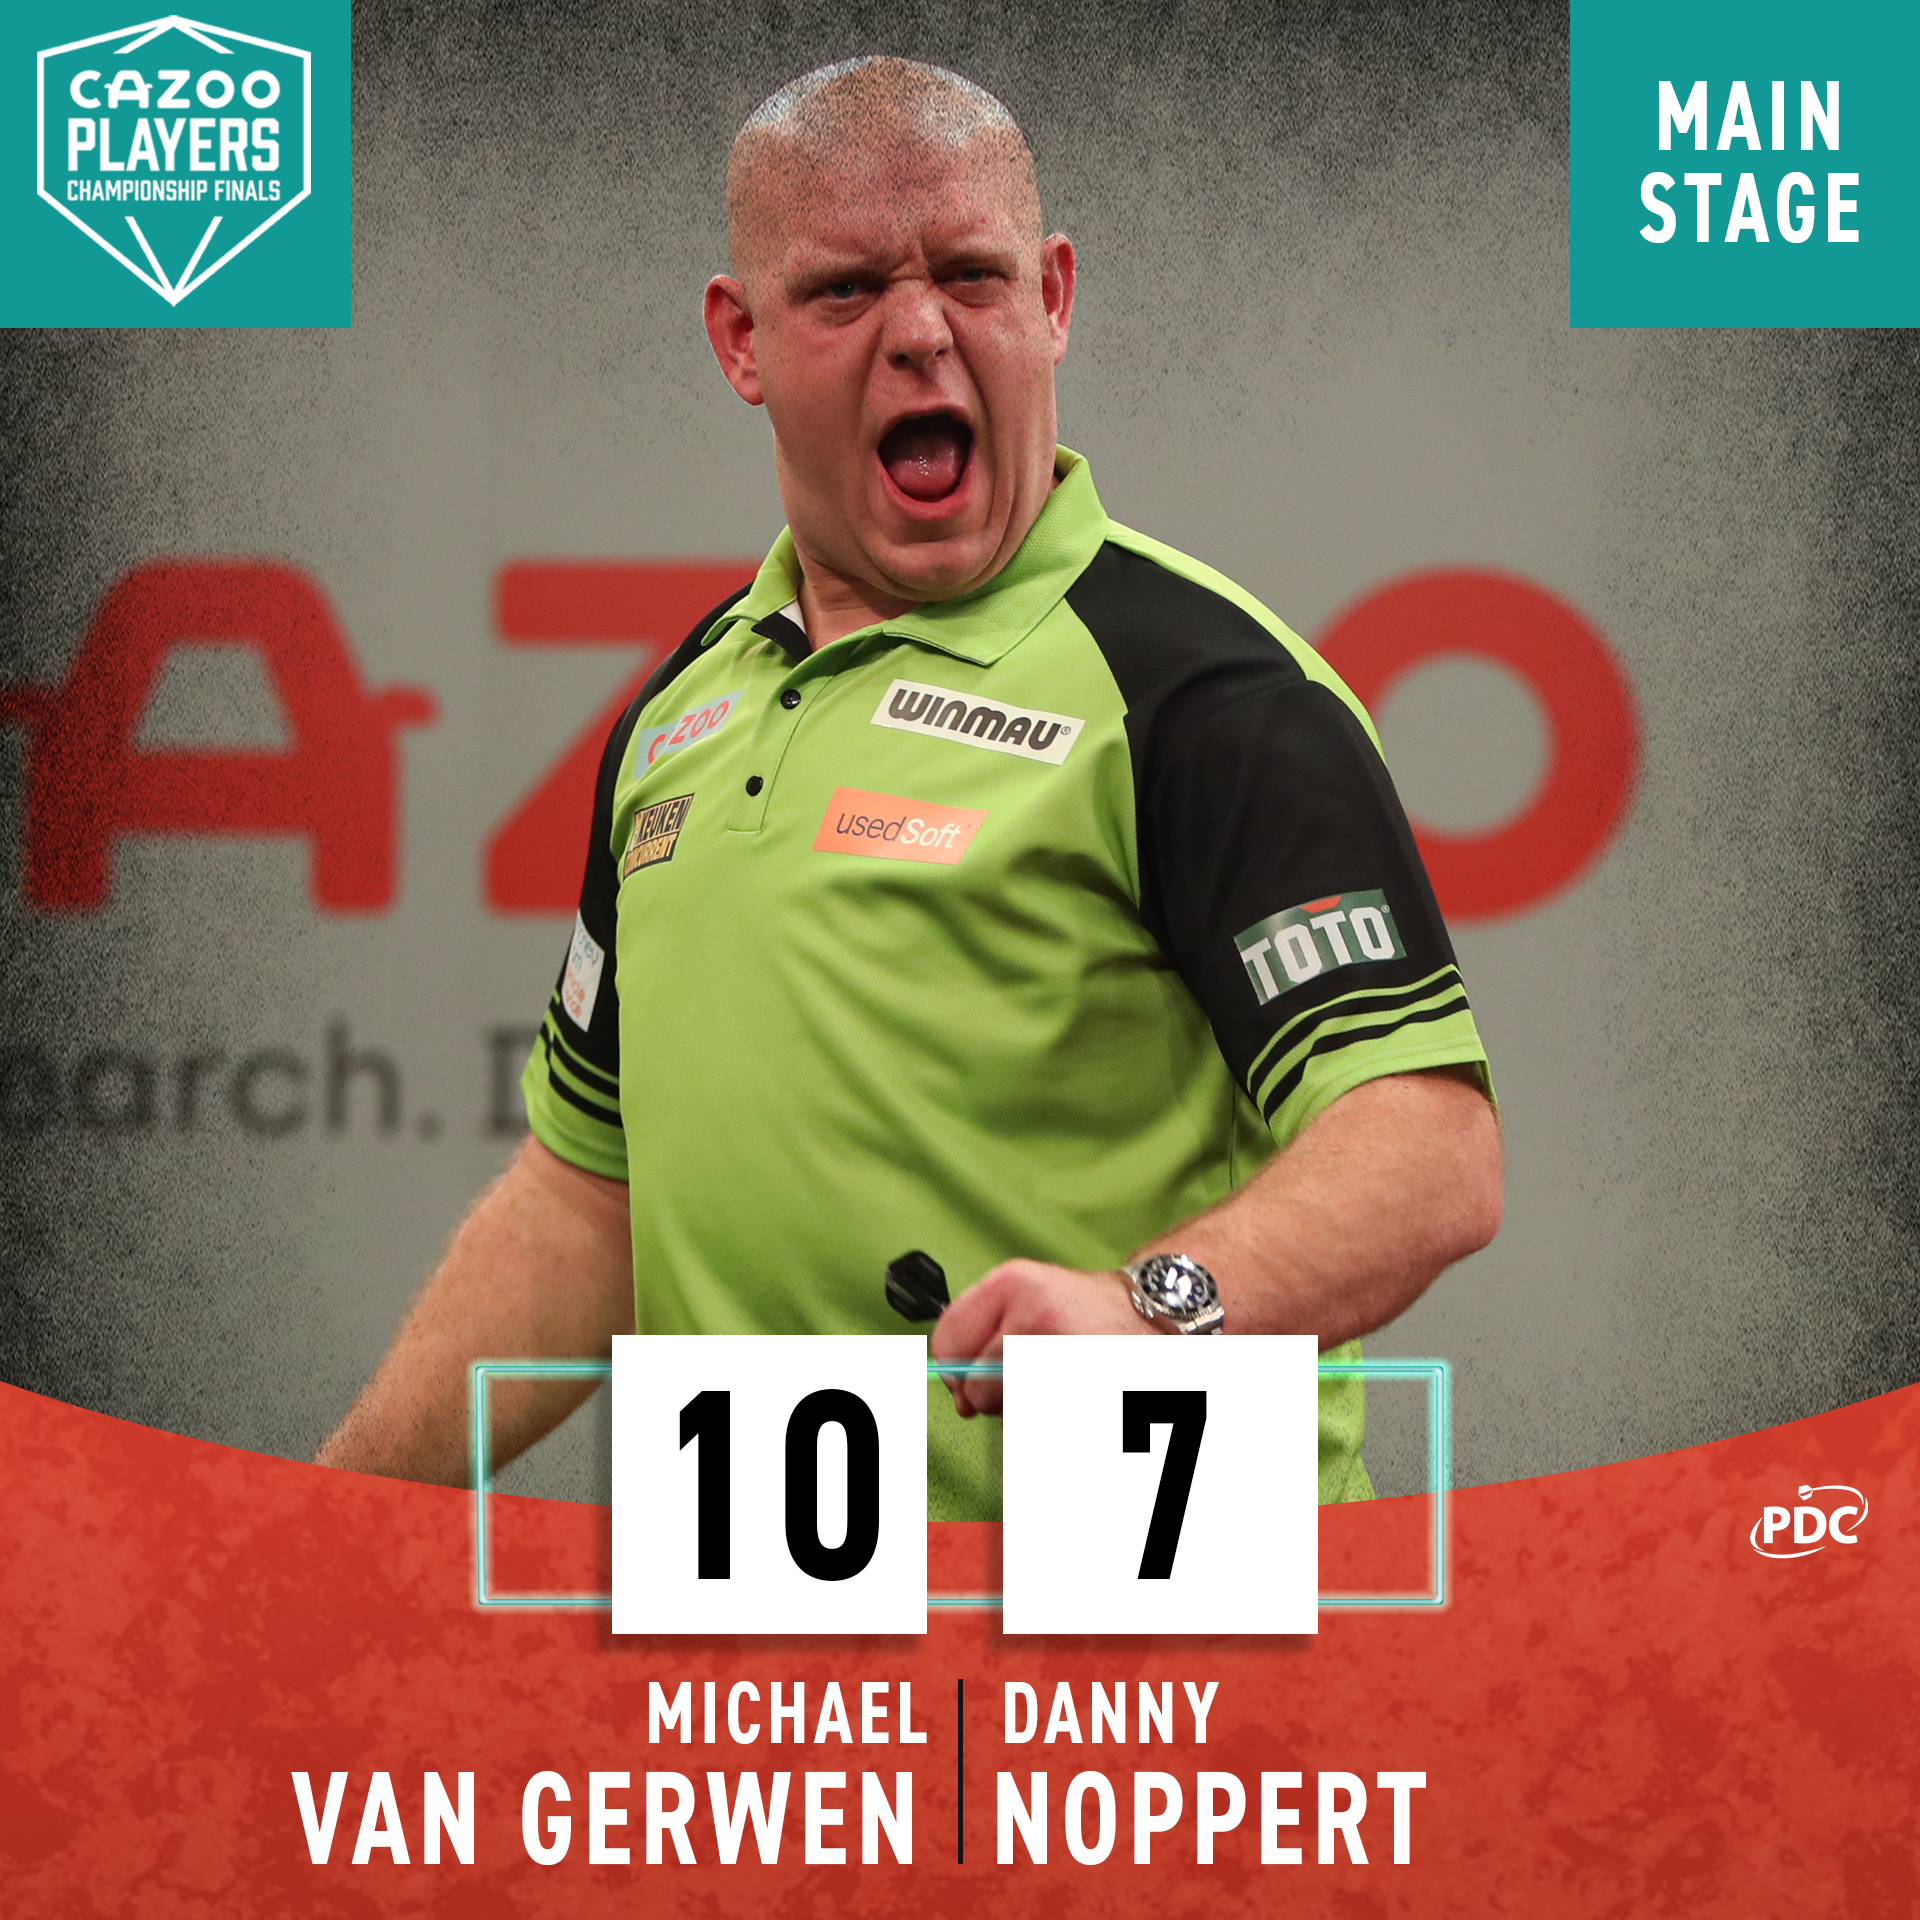 PDC on Twitter: "MVG MARCHES ON! 🇳🇱 Michael Gerwen remains on course for a seventh Players Championship Finals title, defying a late from Danny Noppert to complete a 10-7